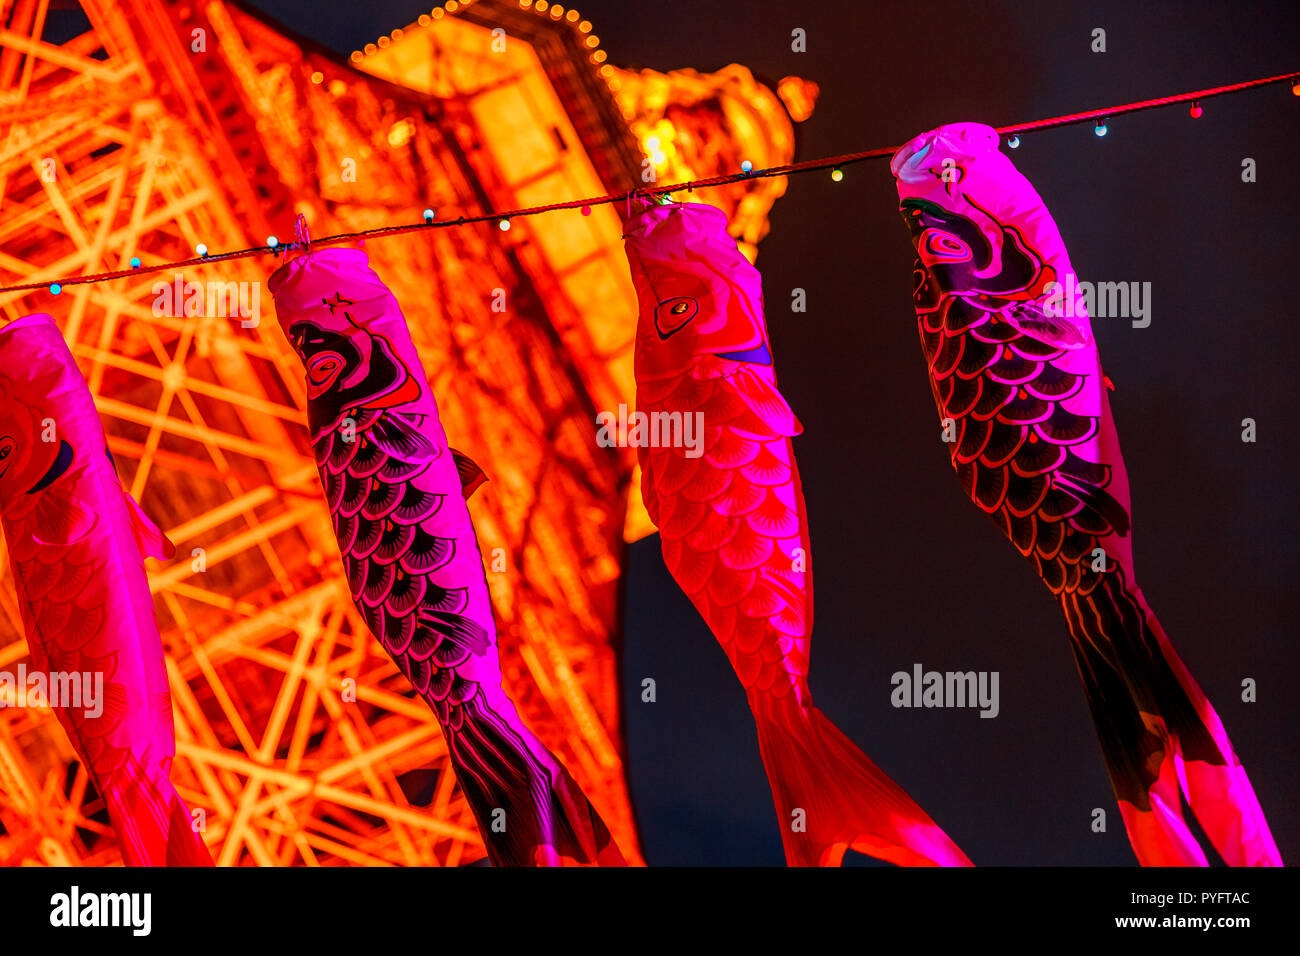 Tokyo, Japan - April 23, 2017: Koinobori a pink carp-shaped wind socks, traditionally flown in Japan to celebrate Children's Day. Blurred Tokyo Tower by night on background. Horizontal shot. Stock Photo